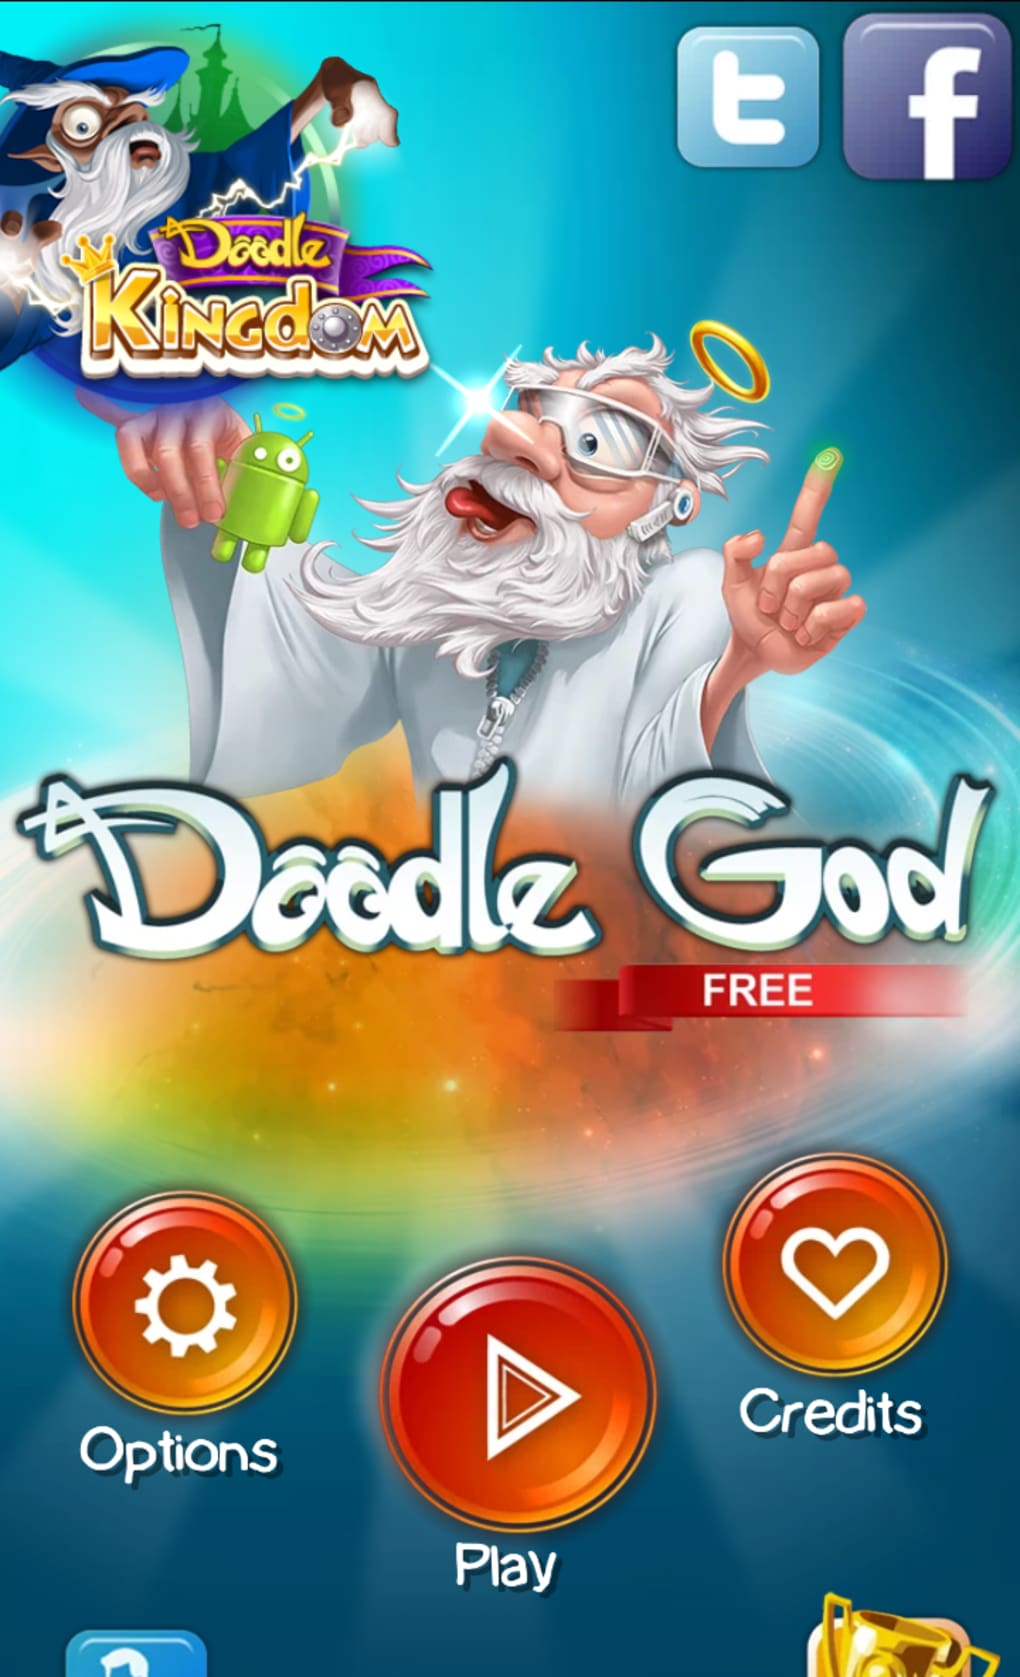 Doodle God : How To Get This Game For FREE!